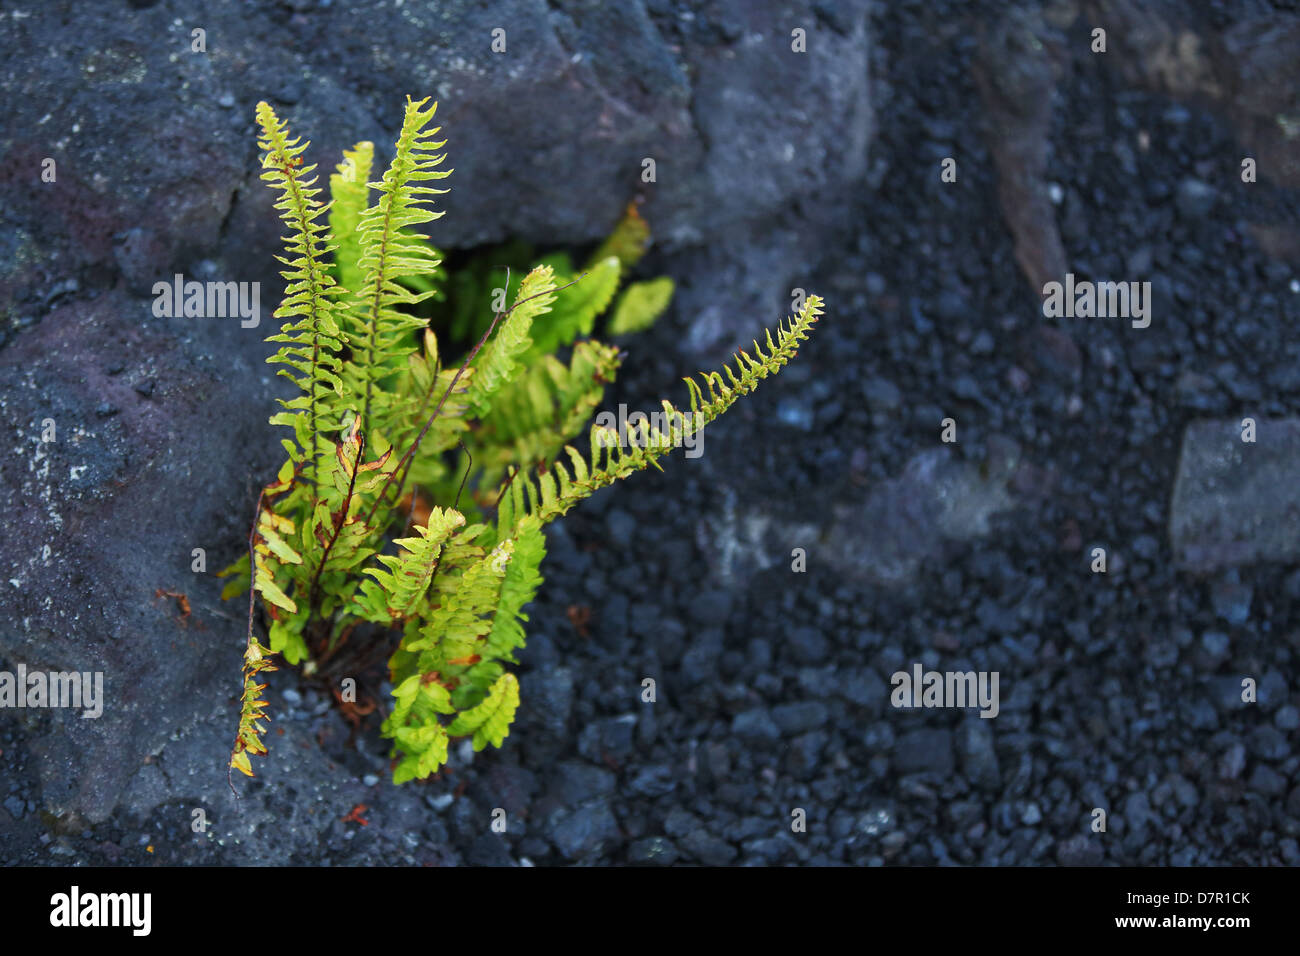 A fern emerges from the volcanic landscape in Hawai'i Volcanoes National Park Stock Photo